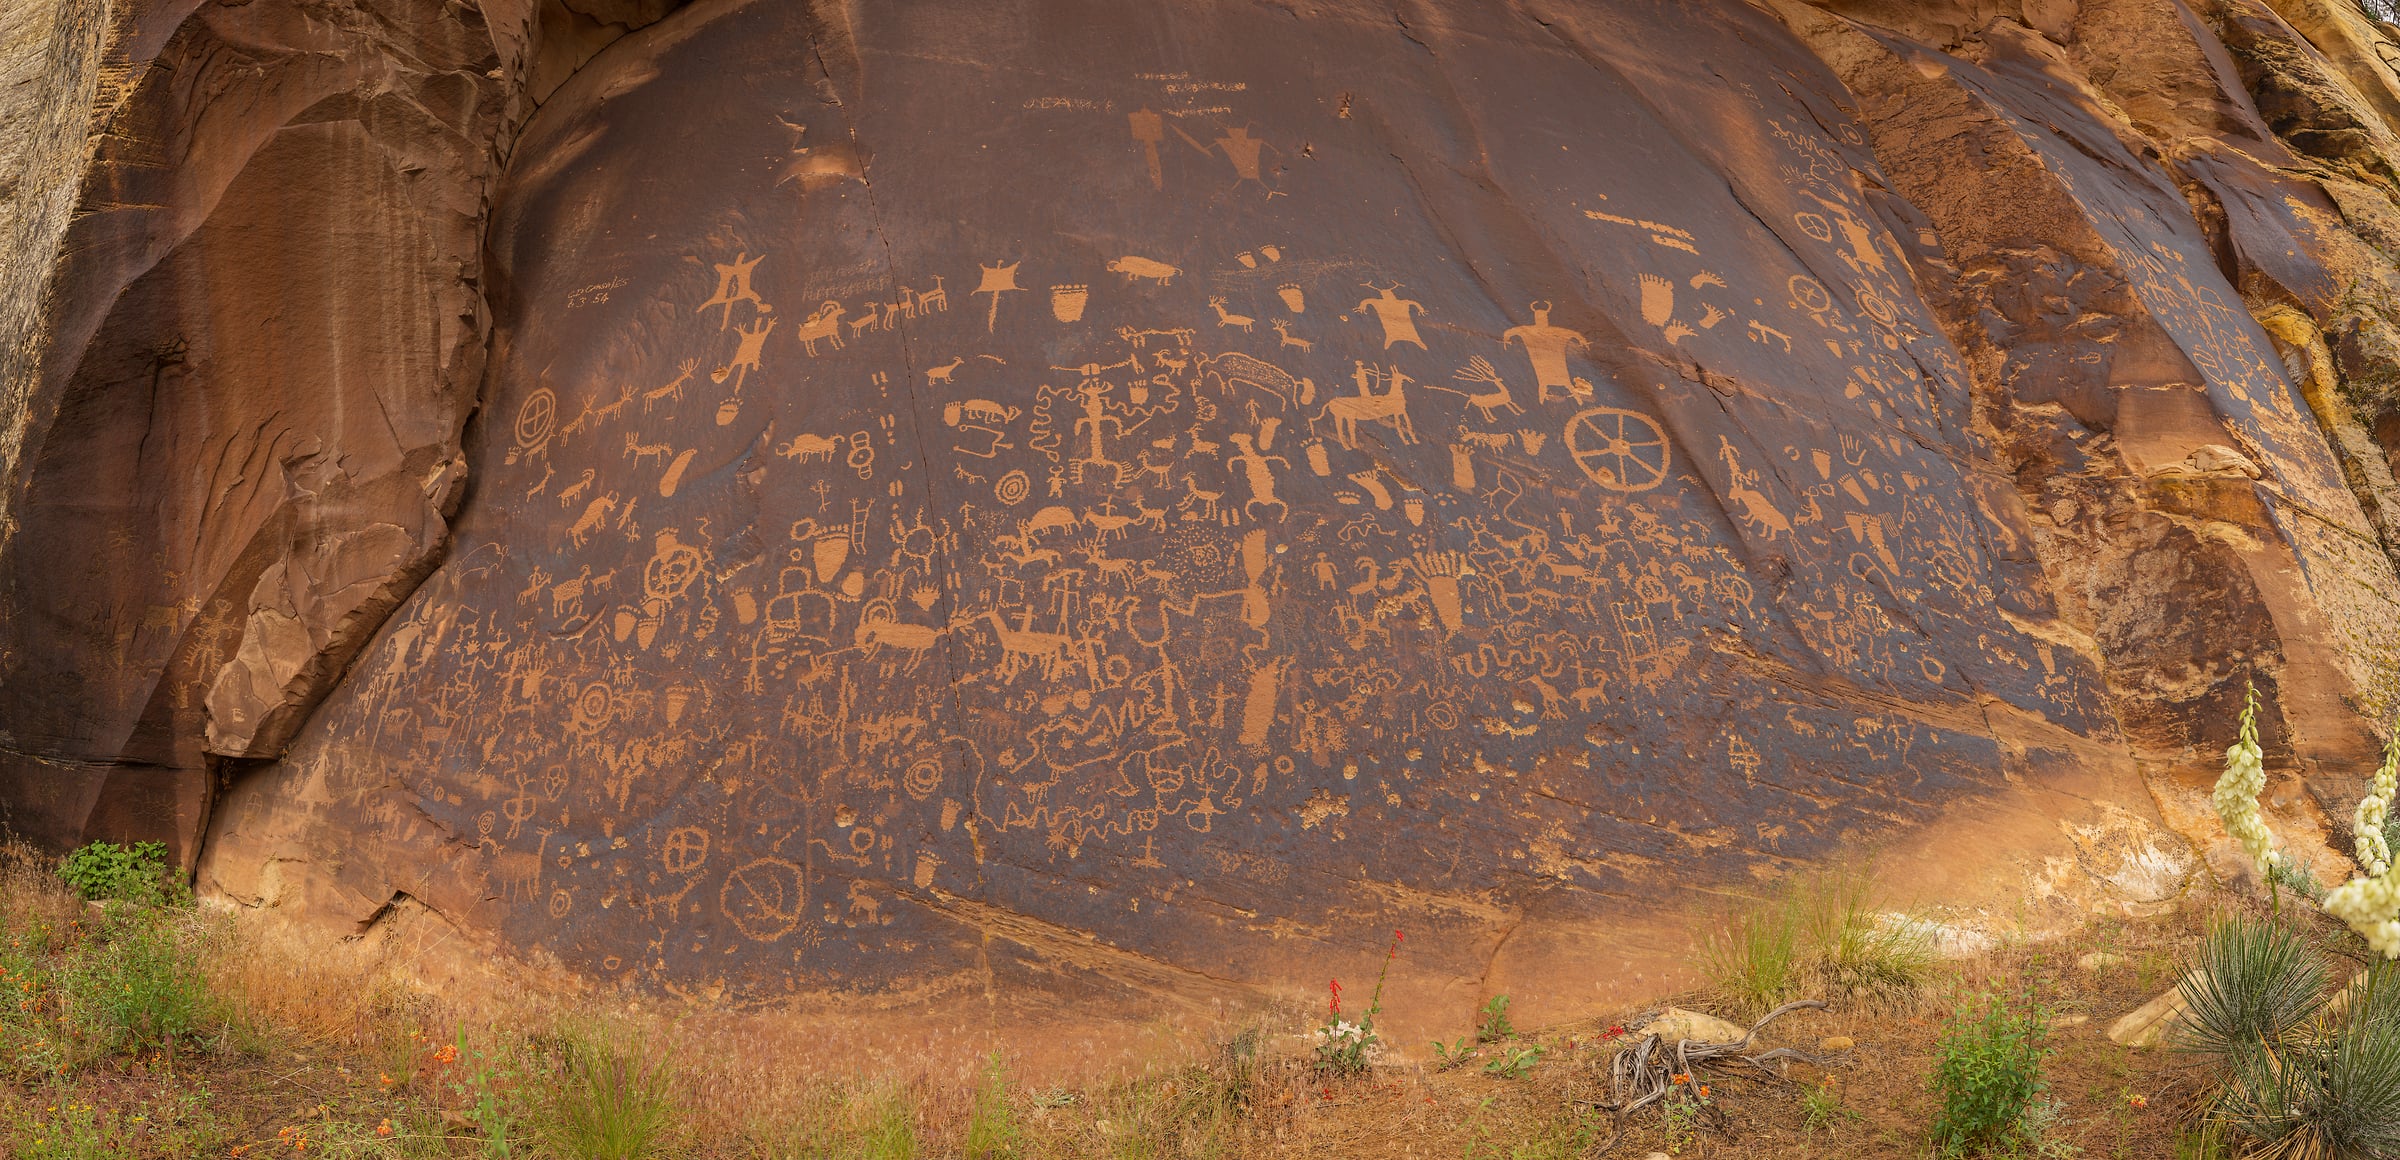 4,433 megapixels! A very high resolution, large-format VAST photo print of petroglyphs on a rock wall; archeological photograph created by John Freeman in Bears Ears National Monument, Utah.